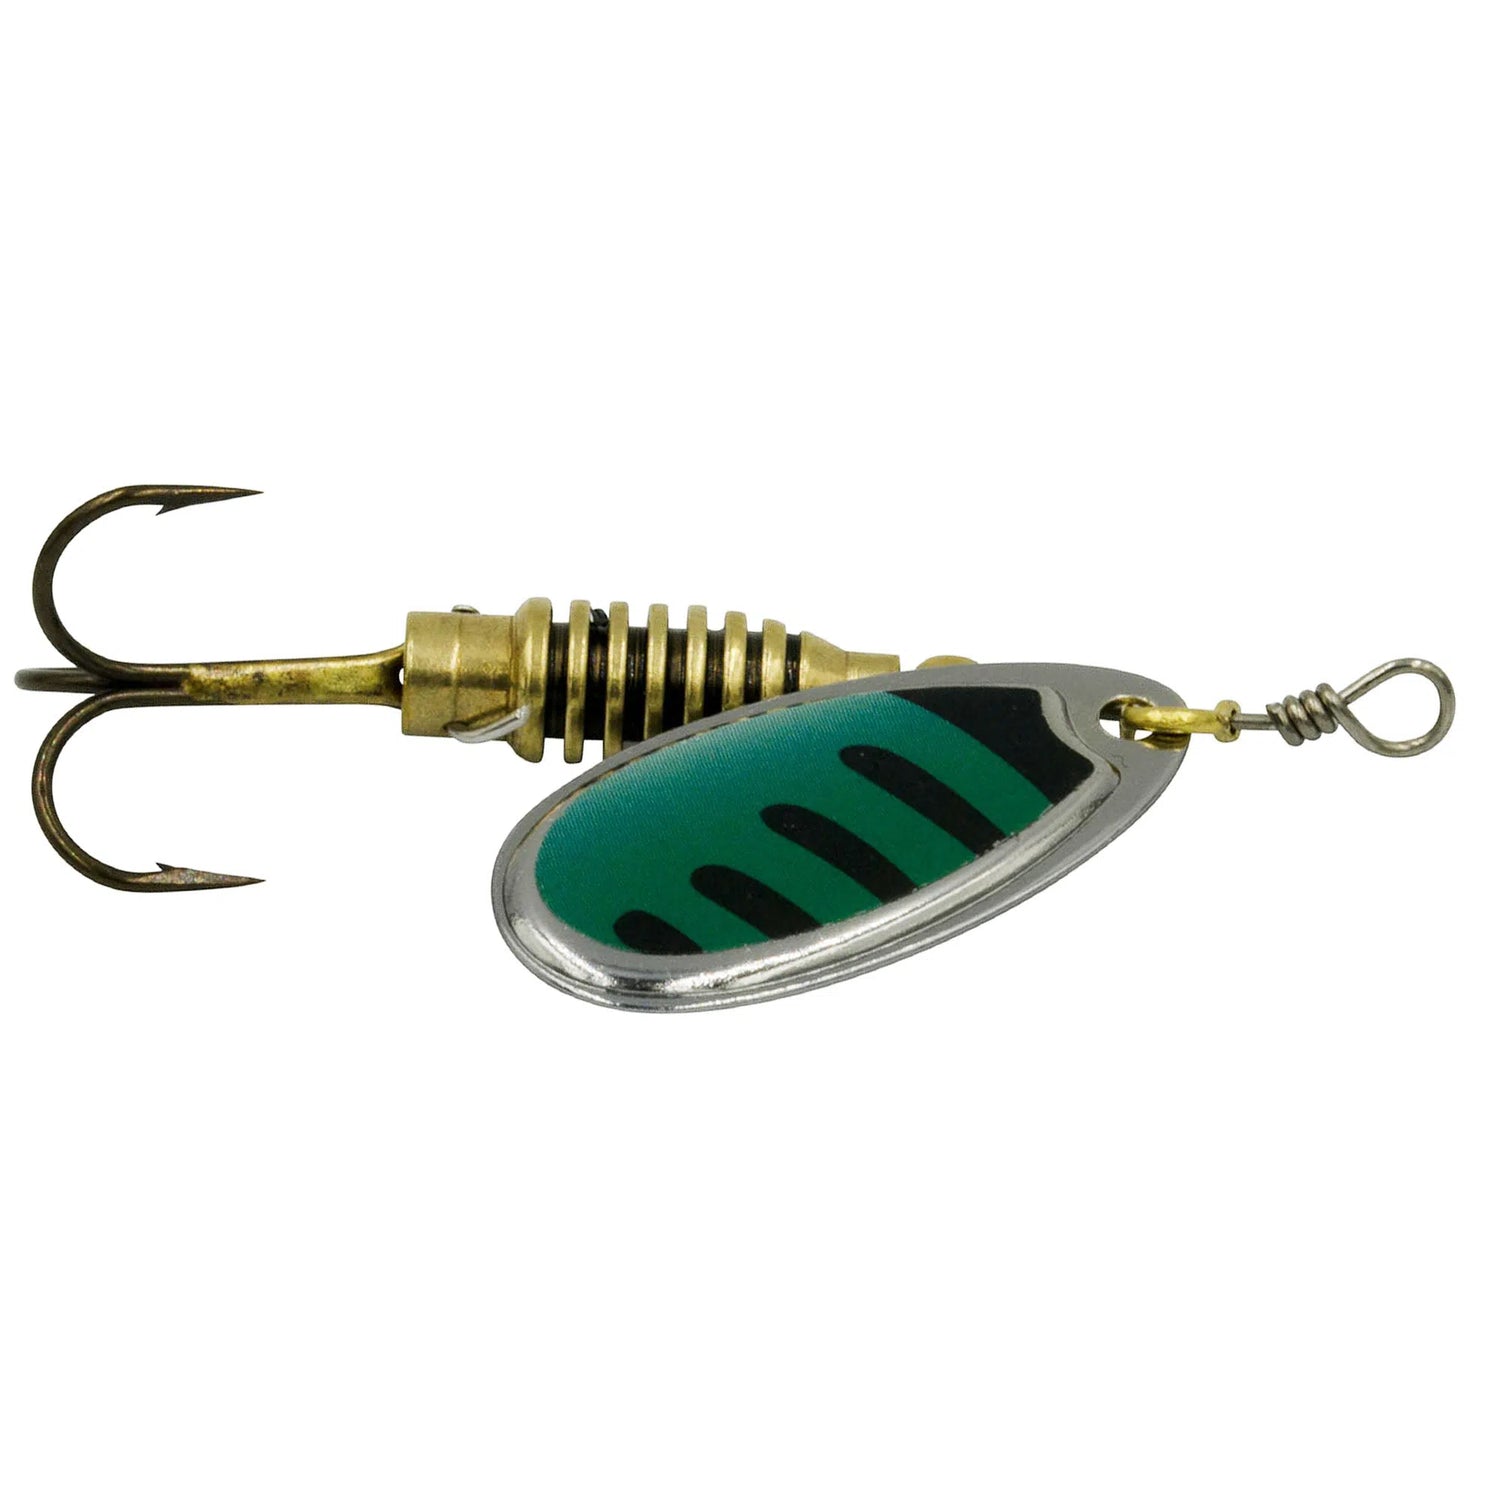 Rublex Celta Classic Spinner-Lure - Spinnerbaits & Spinners-Rublex-Silver Green-#2 - 3.5g-Fishing Station